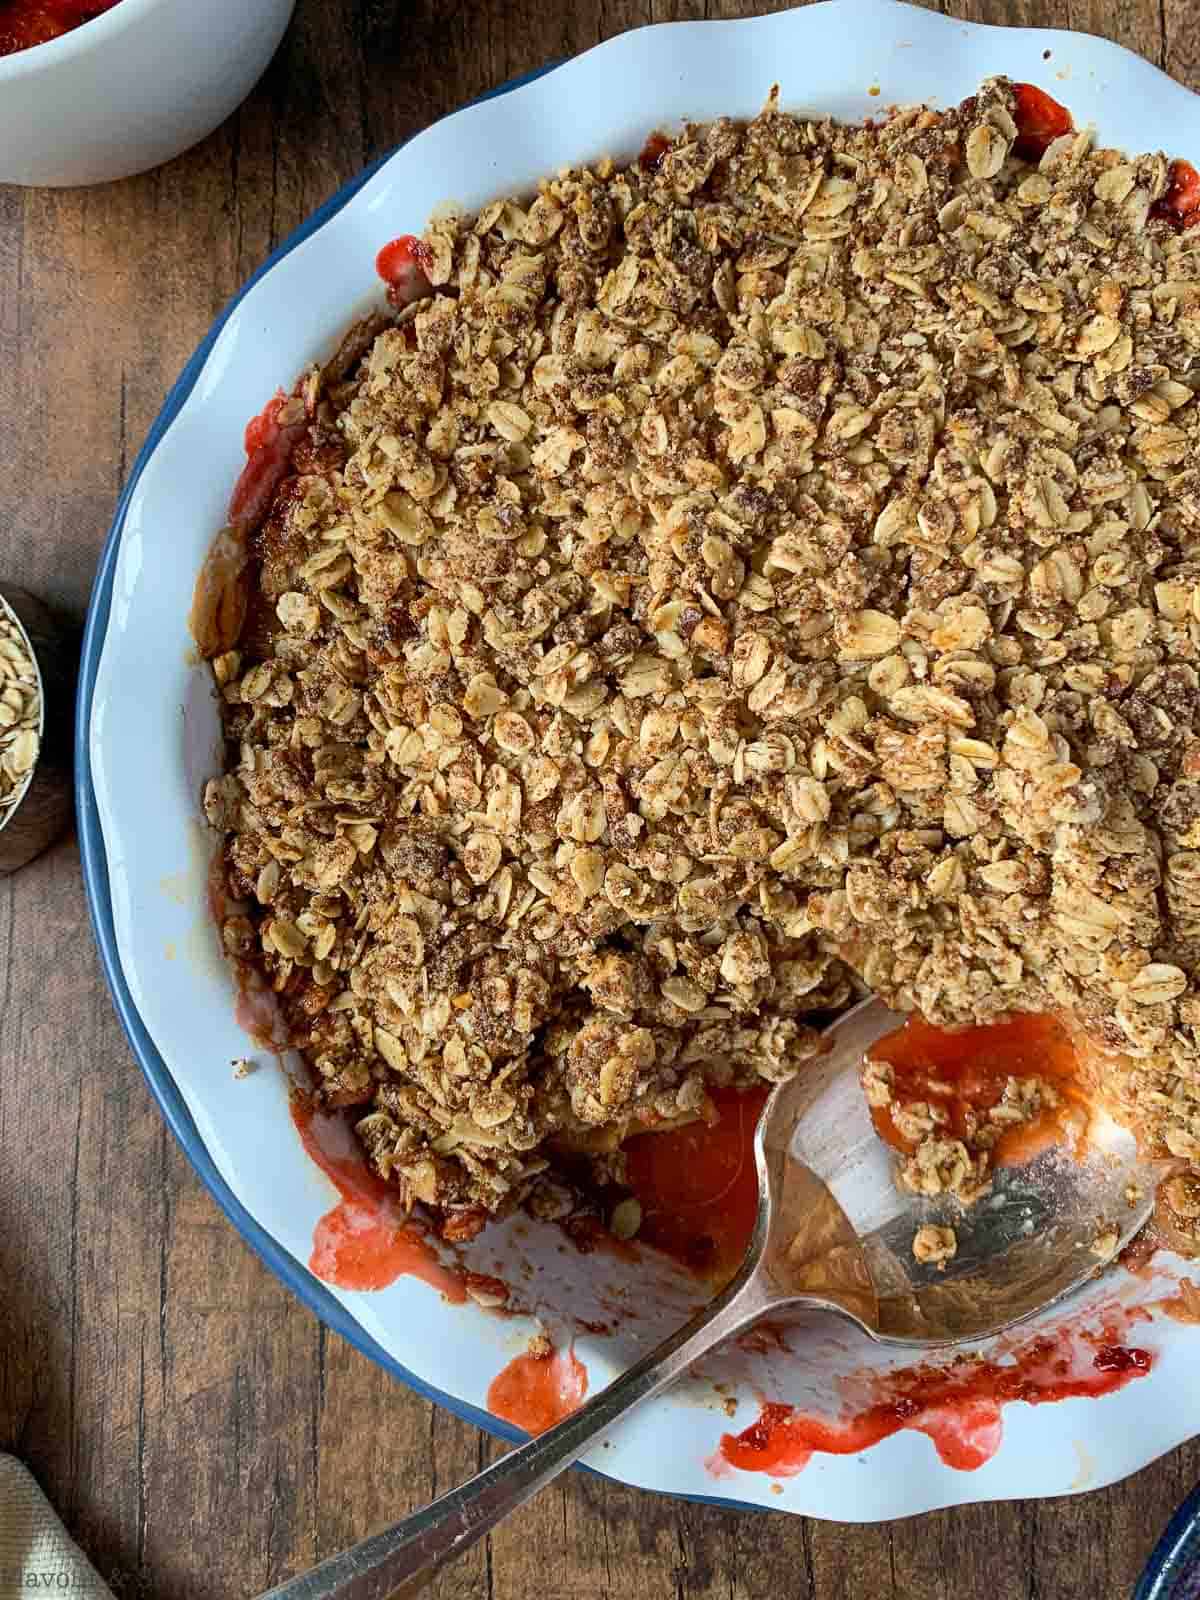 Baked strawberry rhubarb crisp in a baking dish with a spoon.